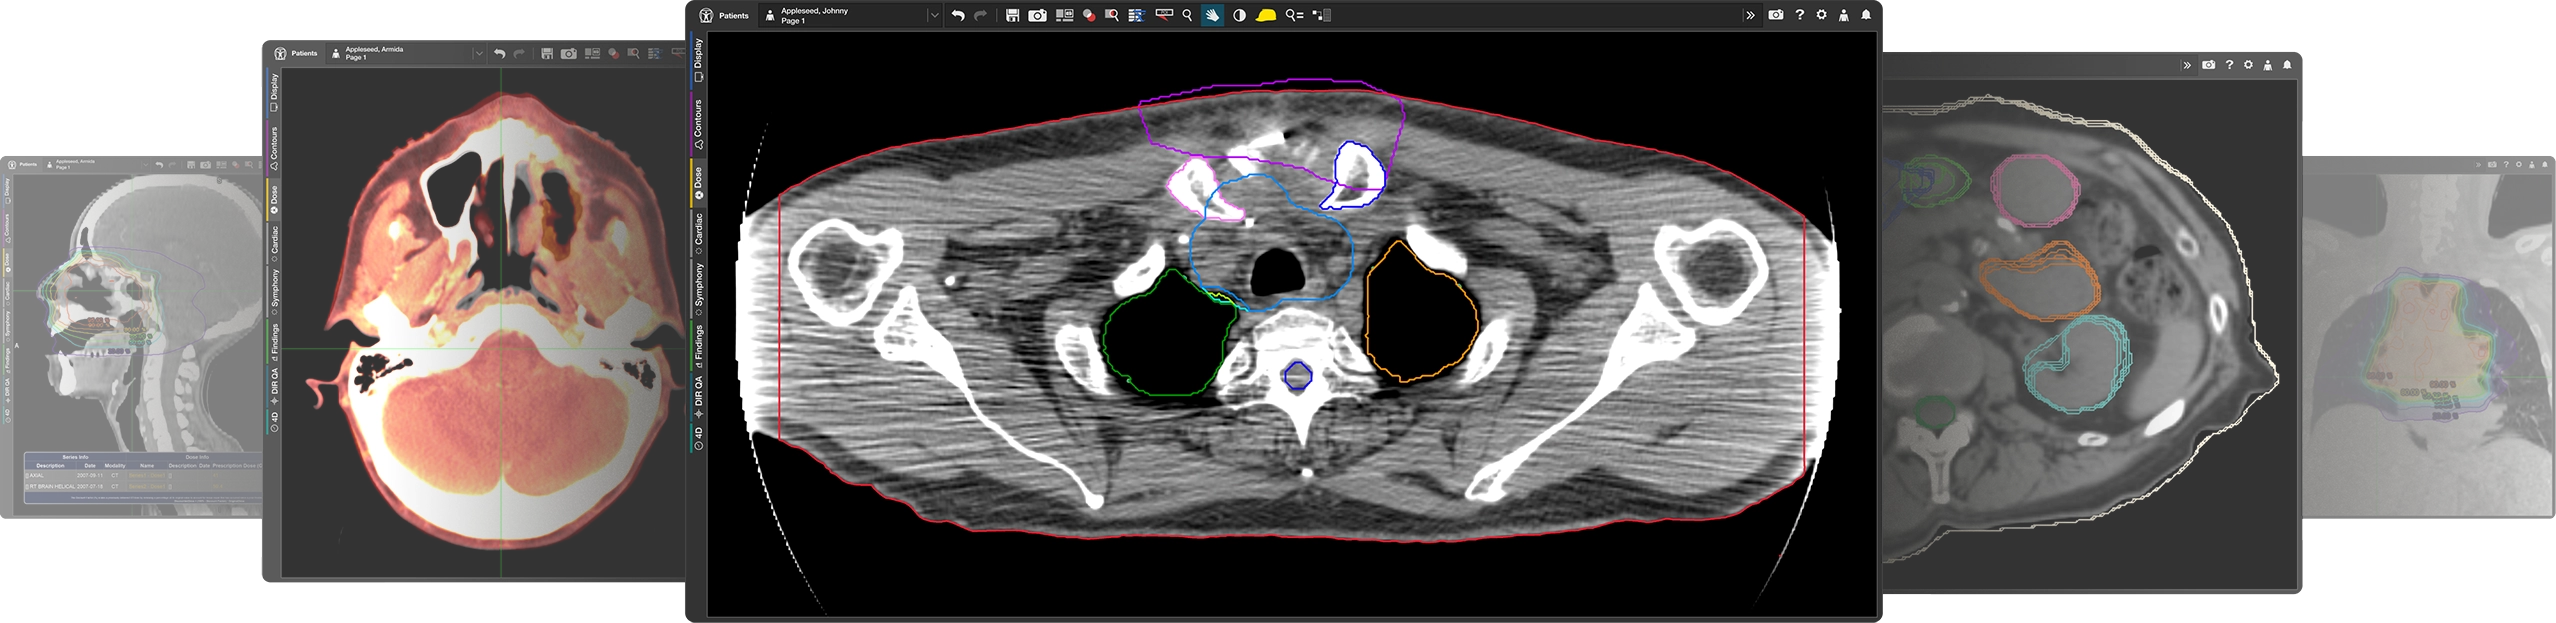 5 medical images centered in a row, showcasing the MIM Maestro interface